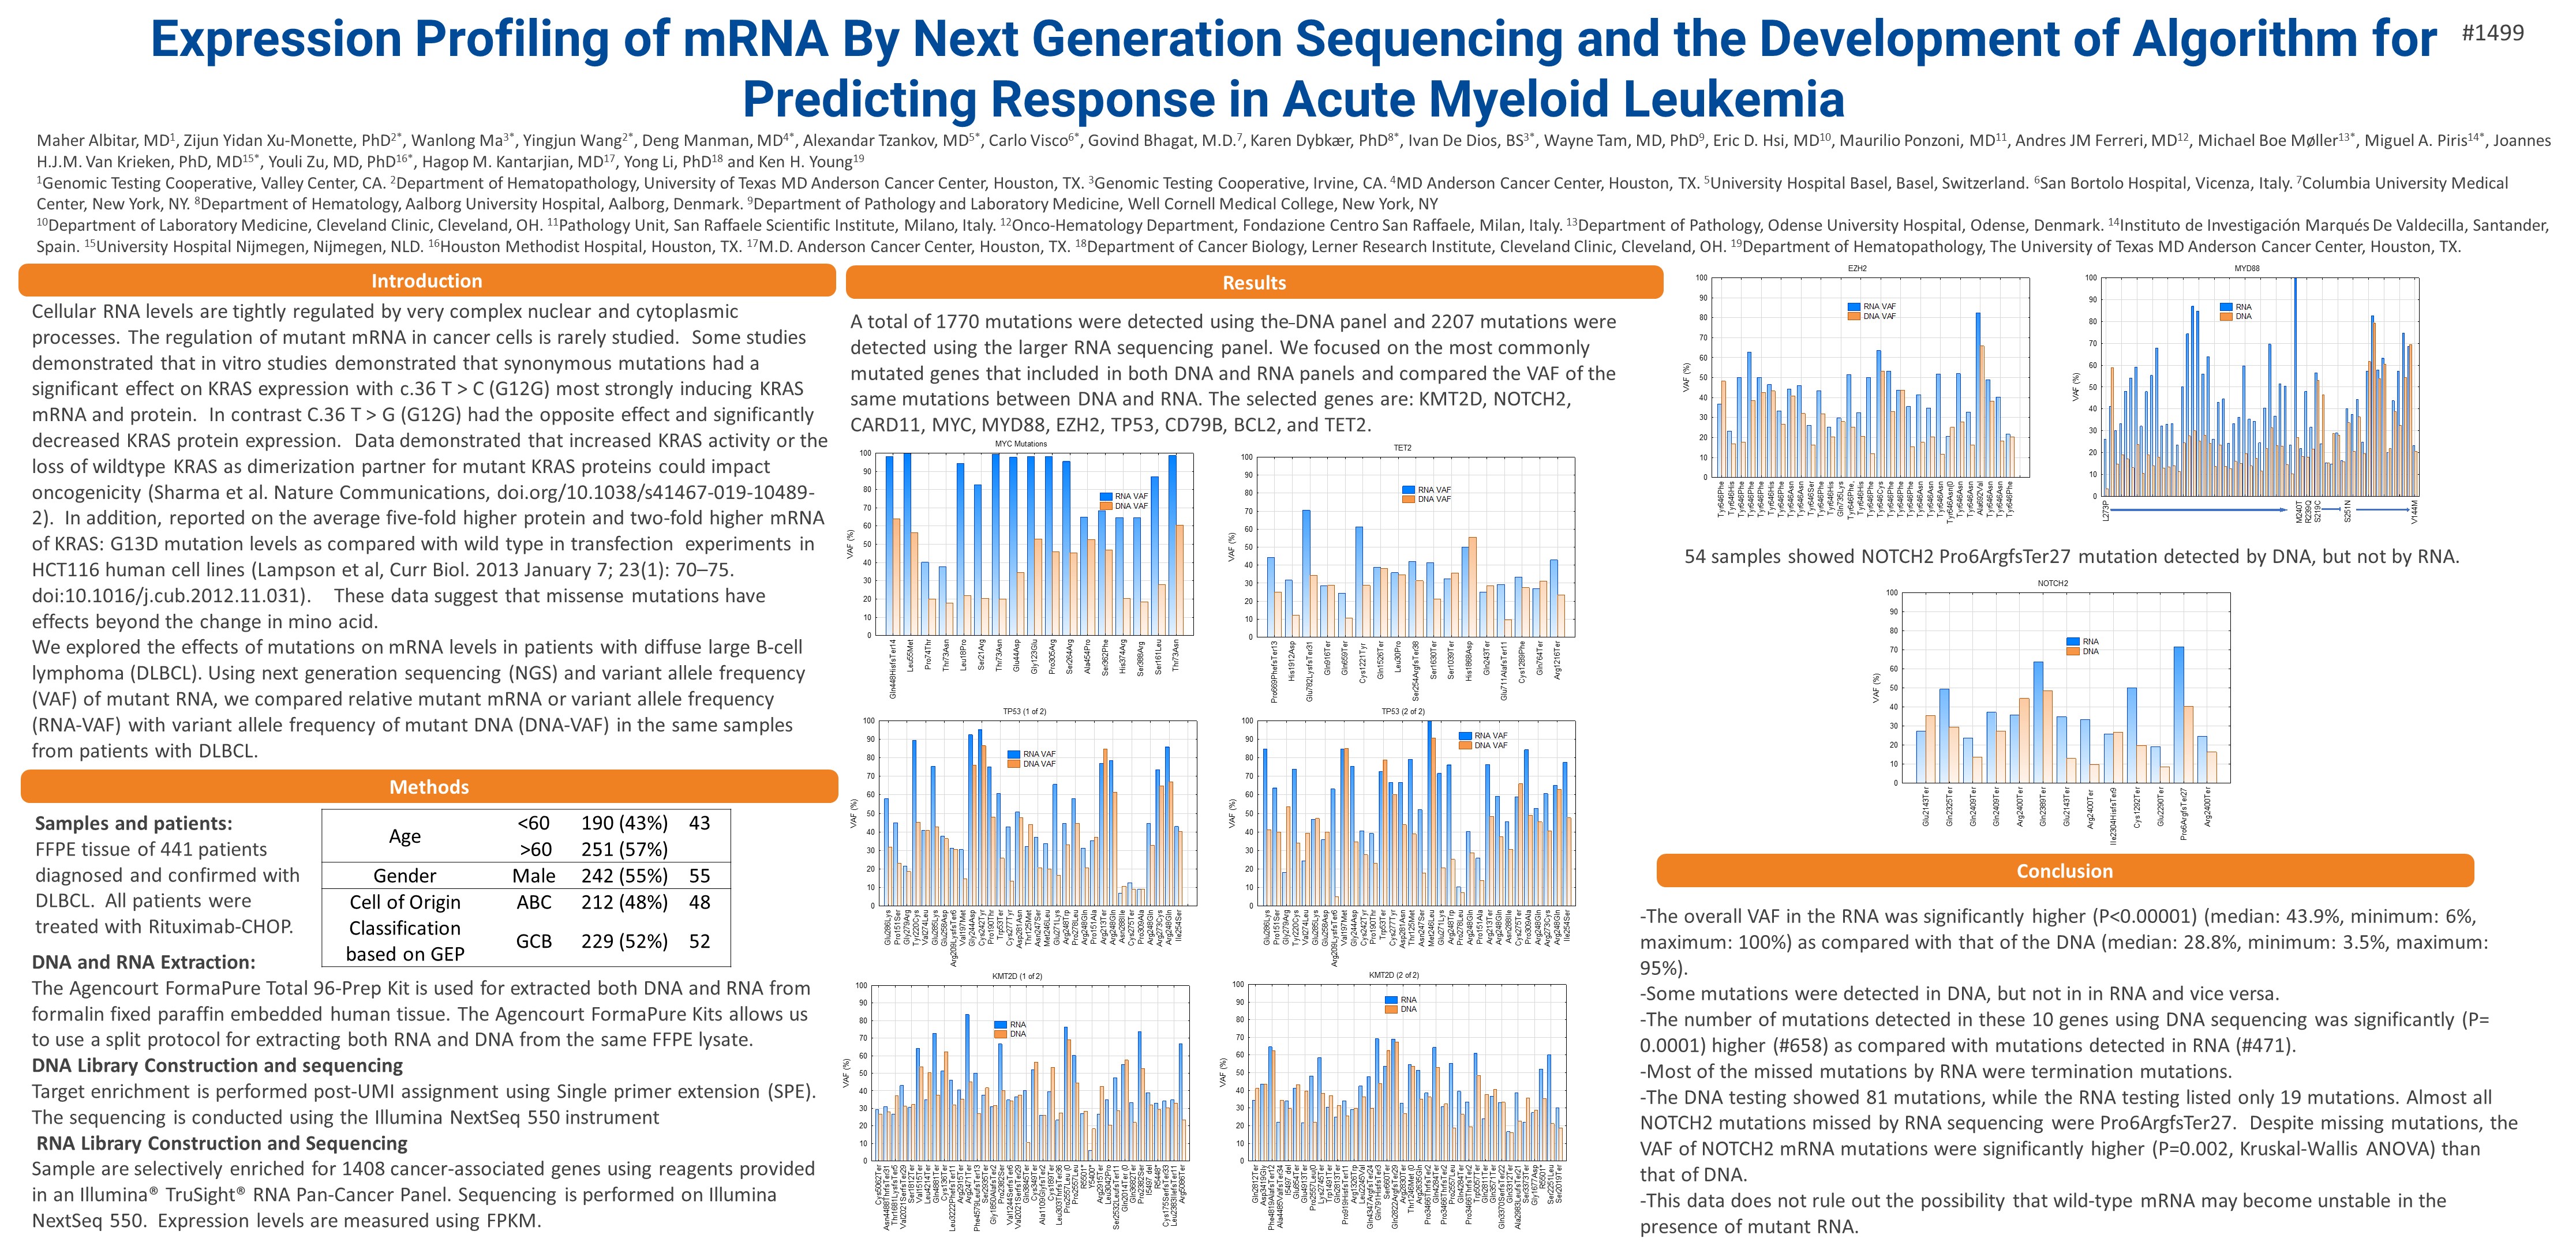 Expression Profiling of mRNA By Next Generation Sequencing and the Development of Algorithm for Predicting Response in Acute Myeloid Leukemia 